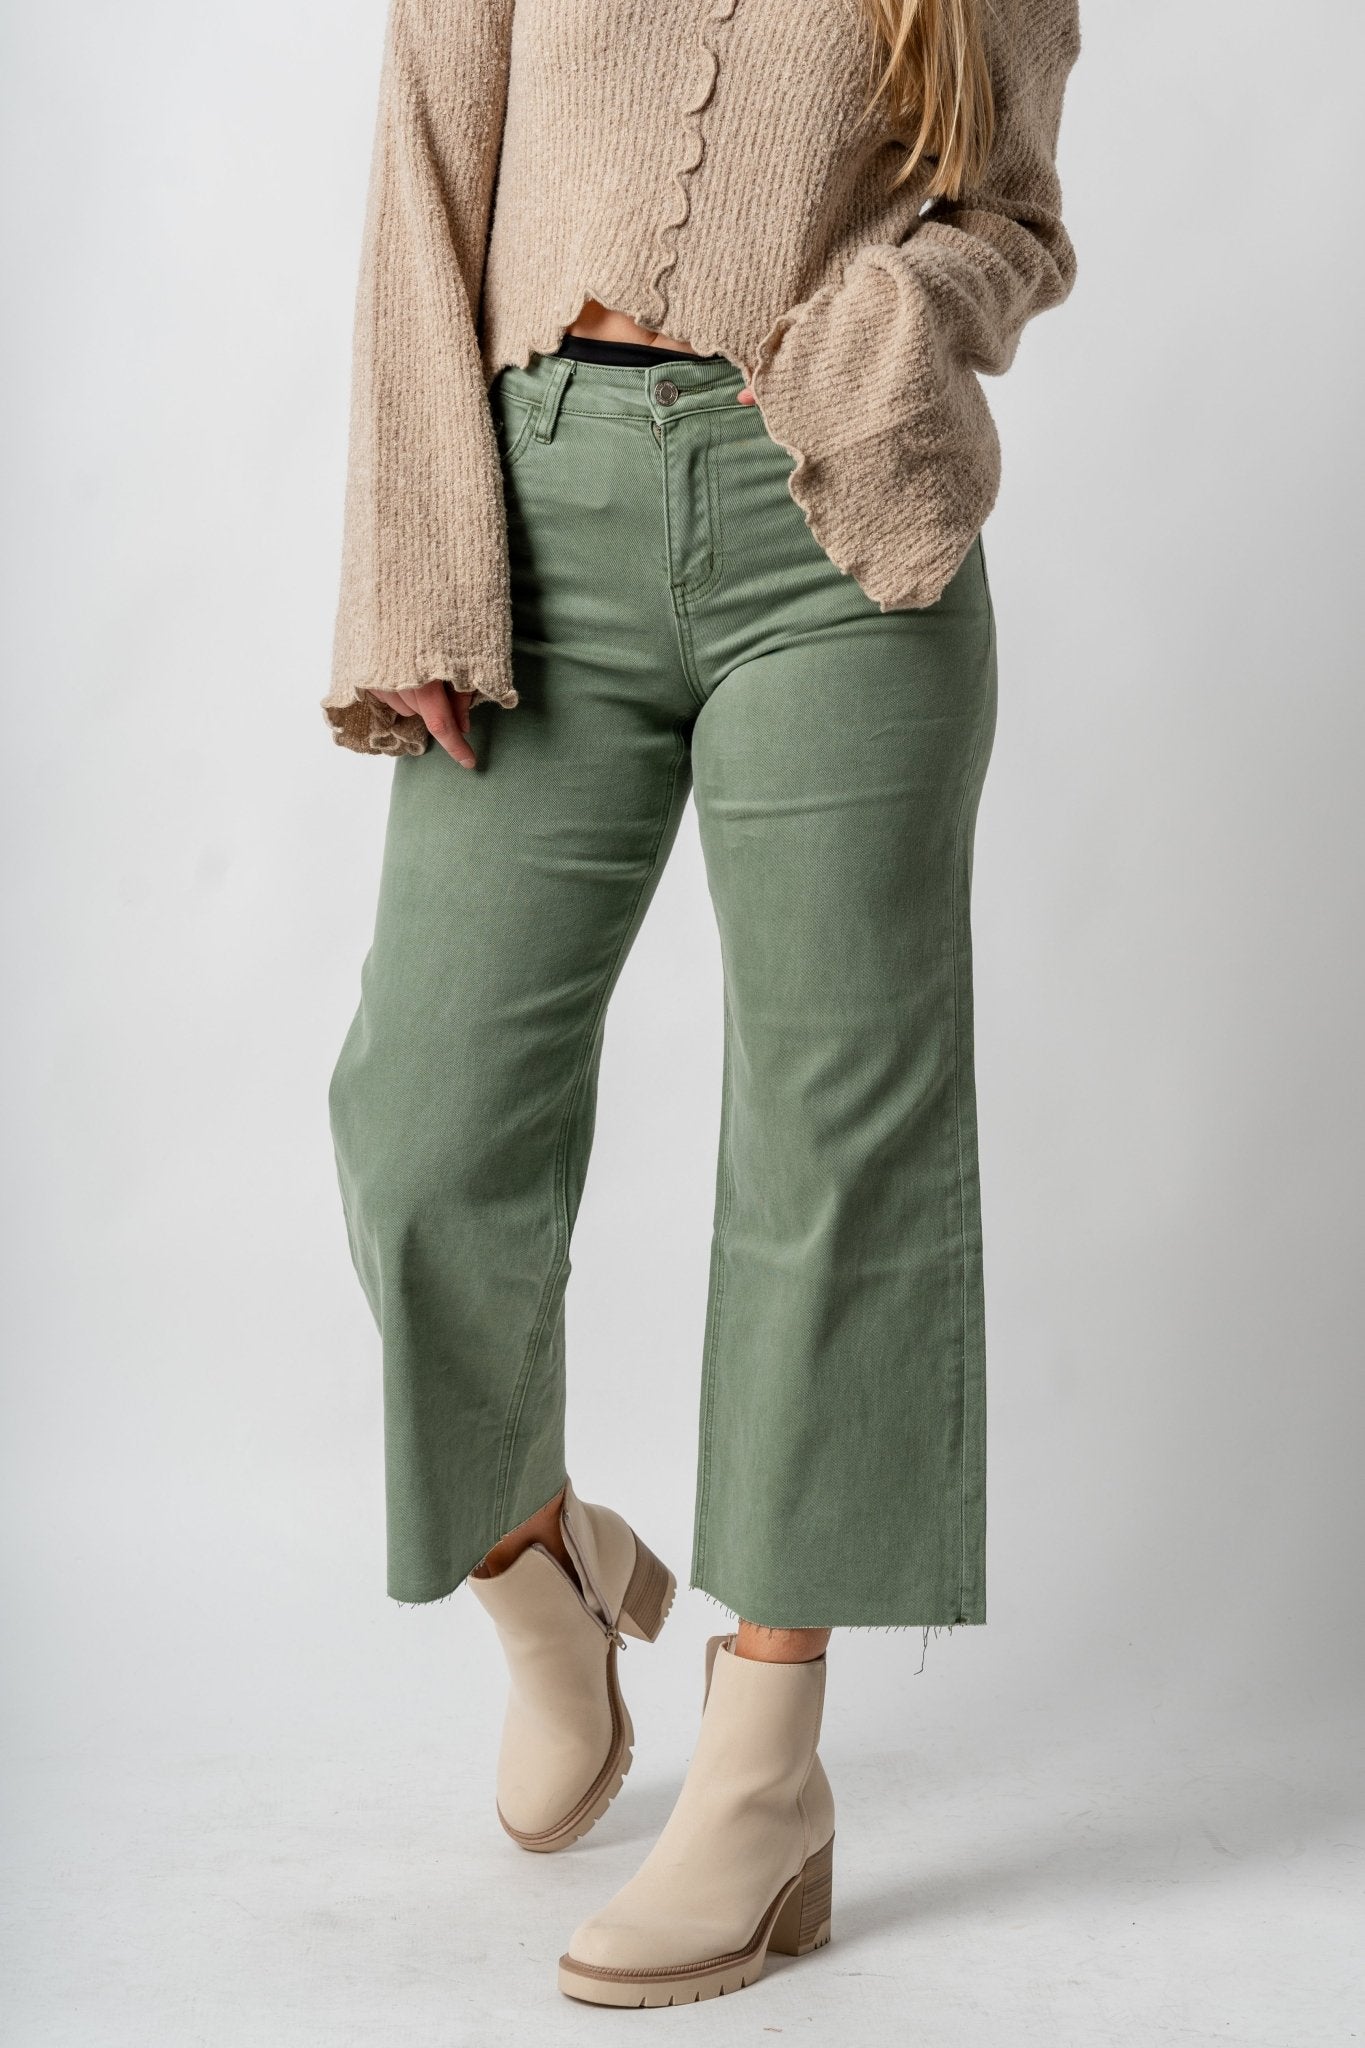 Bottoms | Lush Fashion Lounge: affordable boutique bottoms, trendy boutique bottoms, cute fashion pants, women’s boutique pants, inexpensive online clothing boutiques, cute affordable boutiques. Affordable jeans, trendy skirts and more